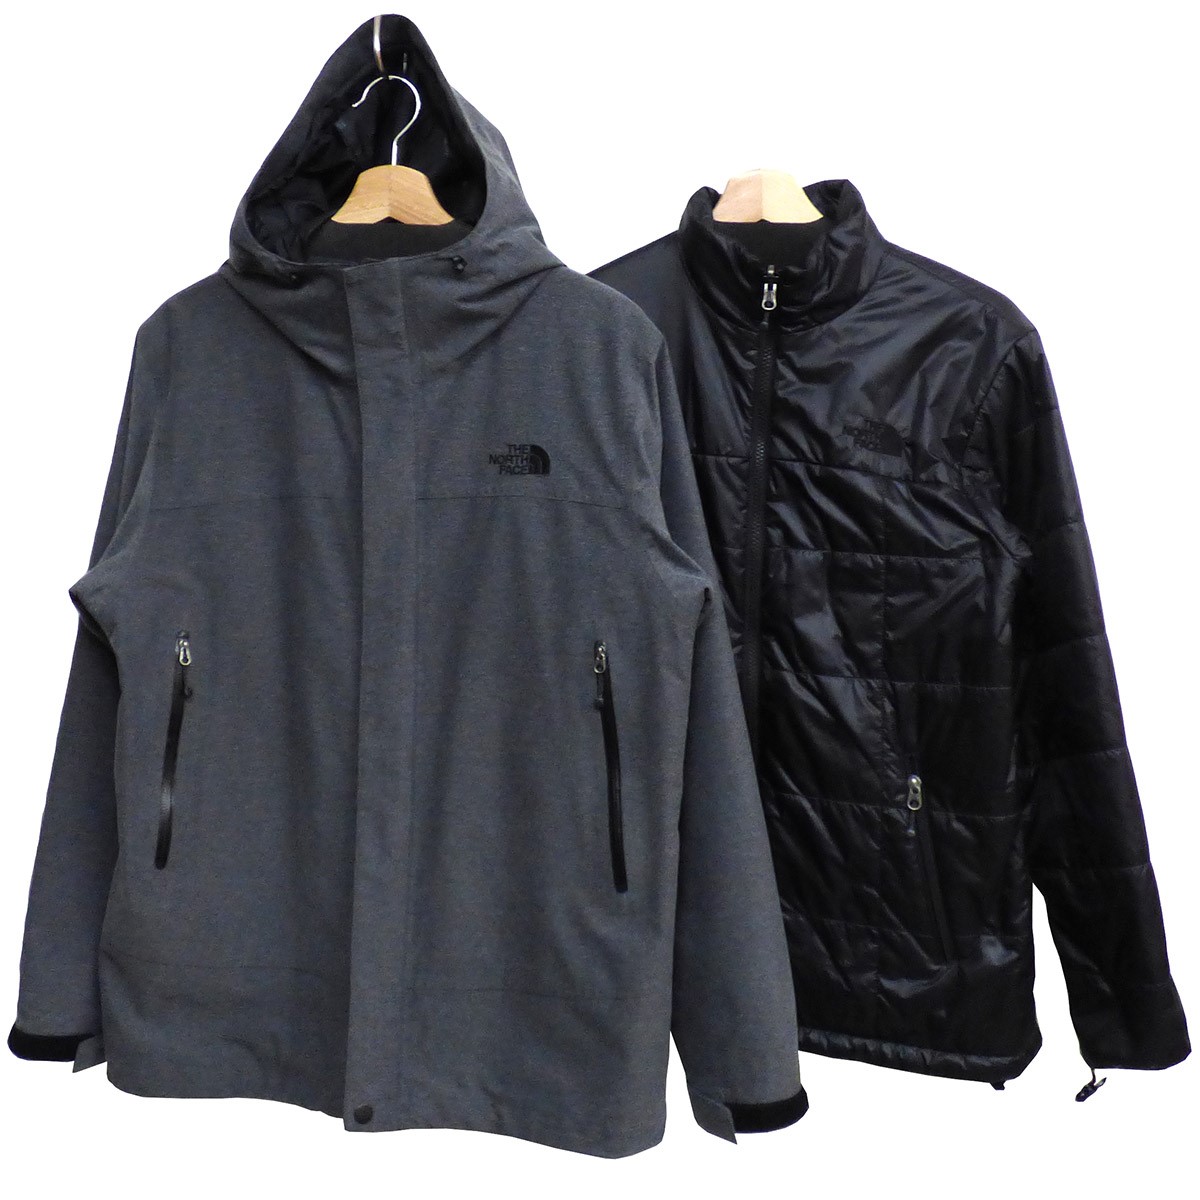 <BR>THE NORTH FACE<BR>Novelty Cassius Triclimate Jacket中綿付マウンテンパーカー グレー サイズ：M／M<BR>